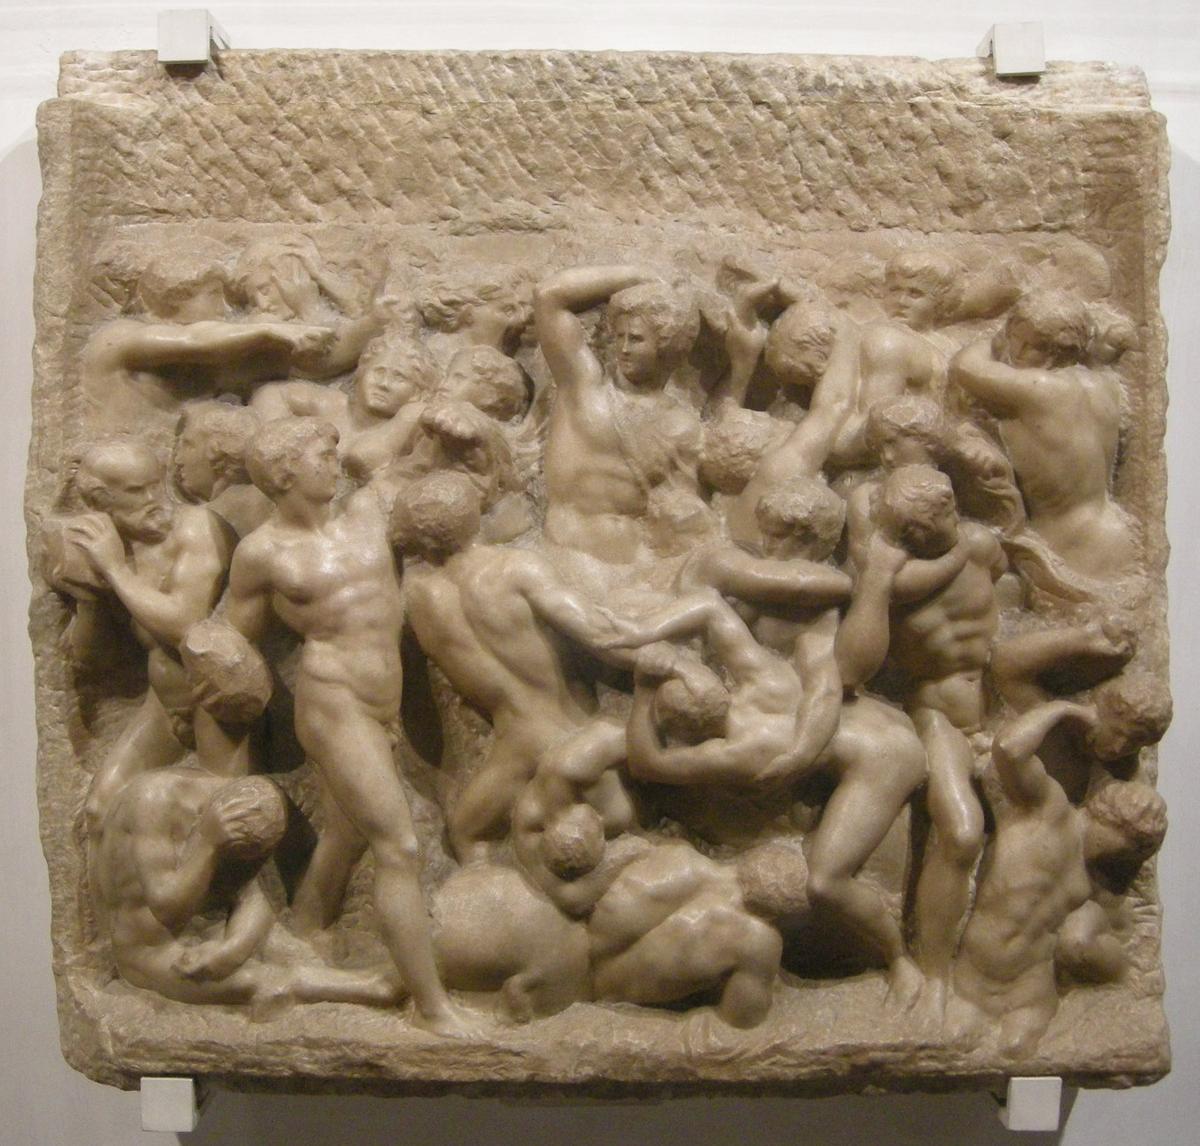 "Battle of the Centaurs," circa 1492, by Michelangelo. Marble; 33.2 inches by 35.6 inches. Casa Buonarroti, Florence. (sailko/CC BY-SA 3.0)